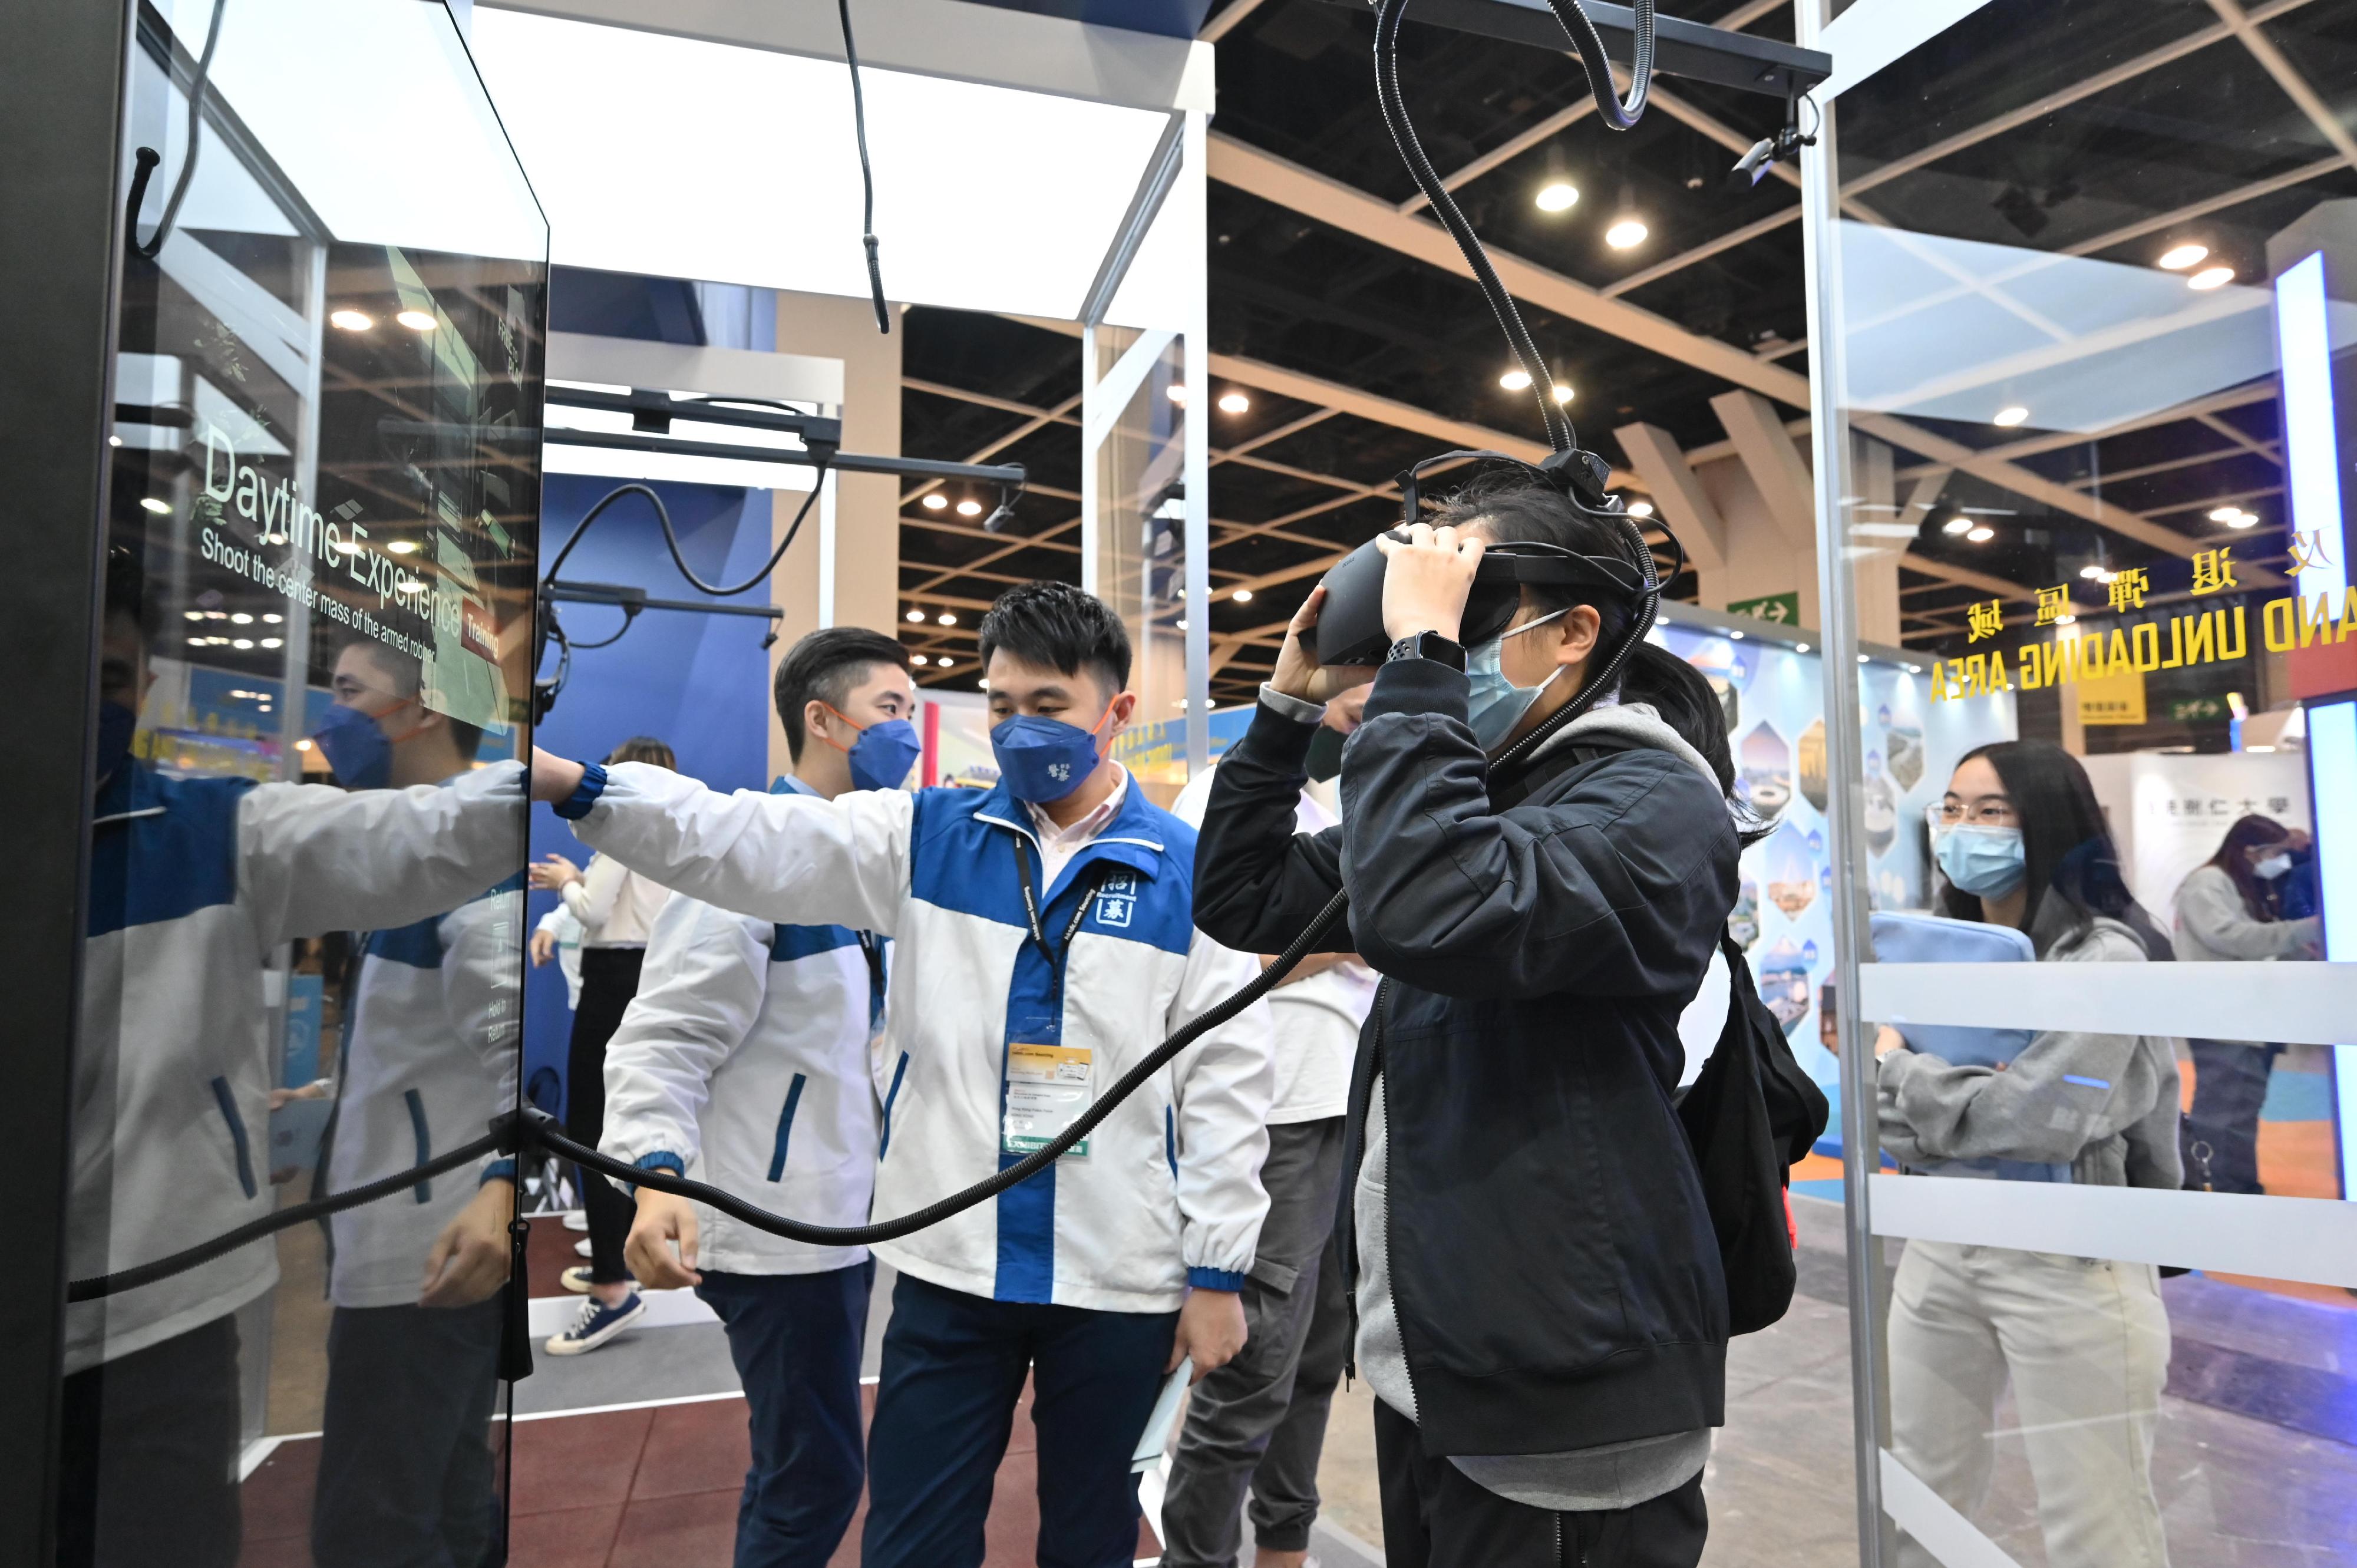 The Police Force introduces its work and provides recruitment information to visitors at the four-day Education and Careers Expo 2023 starting today (February 2). Photo shows a participant taking part in the immersive Virtual Reality simulated police firearms training.